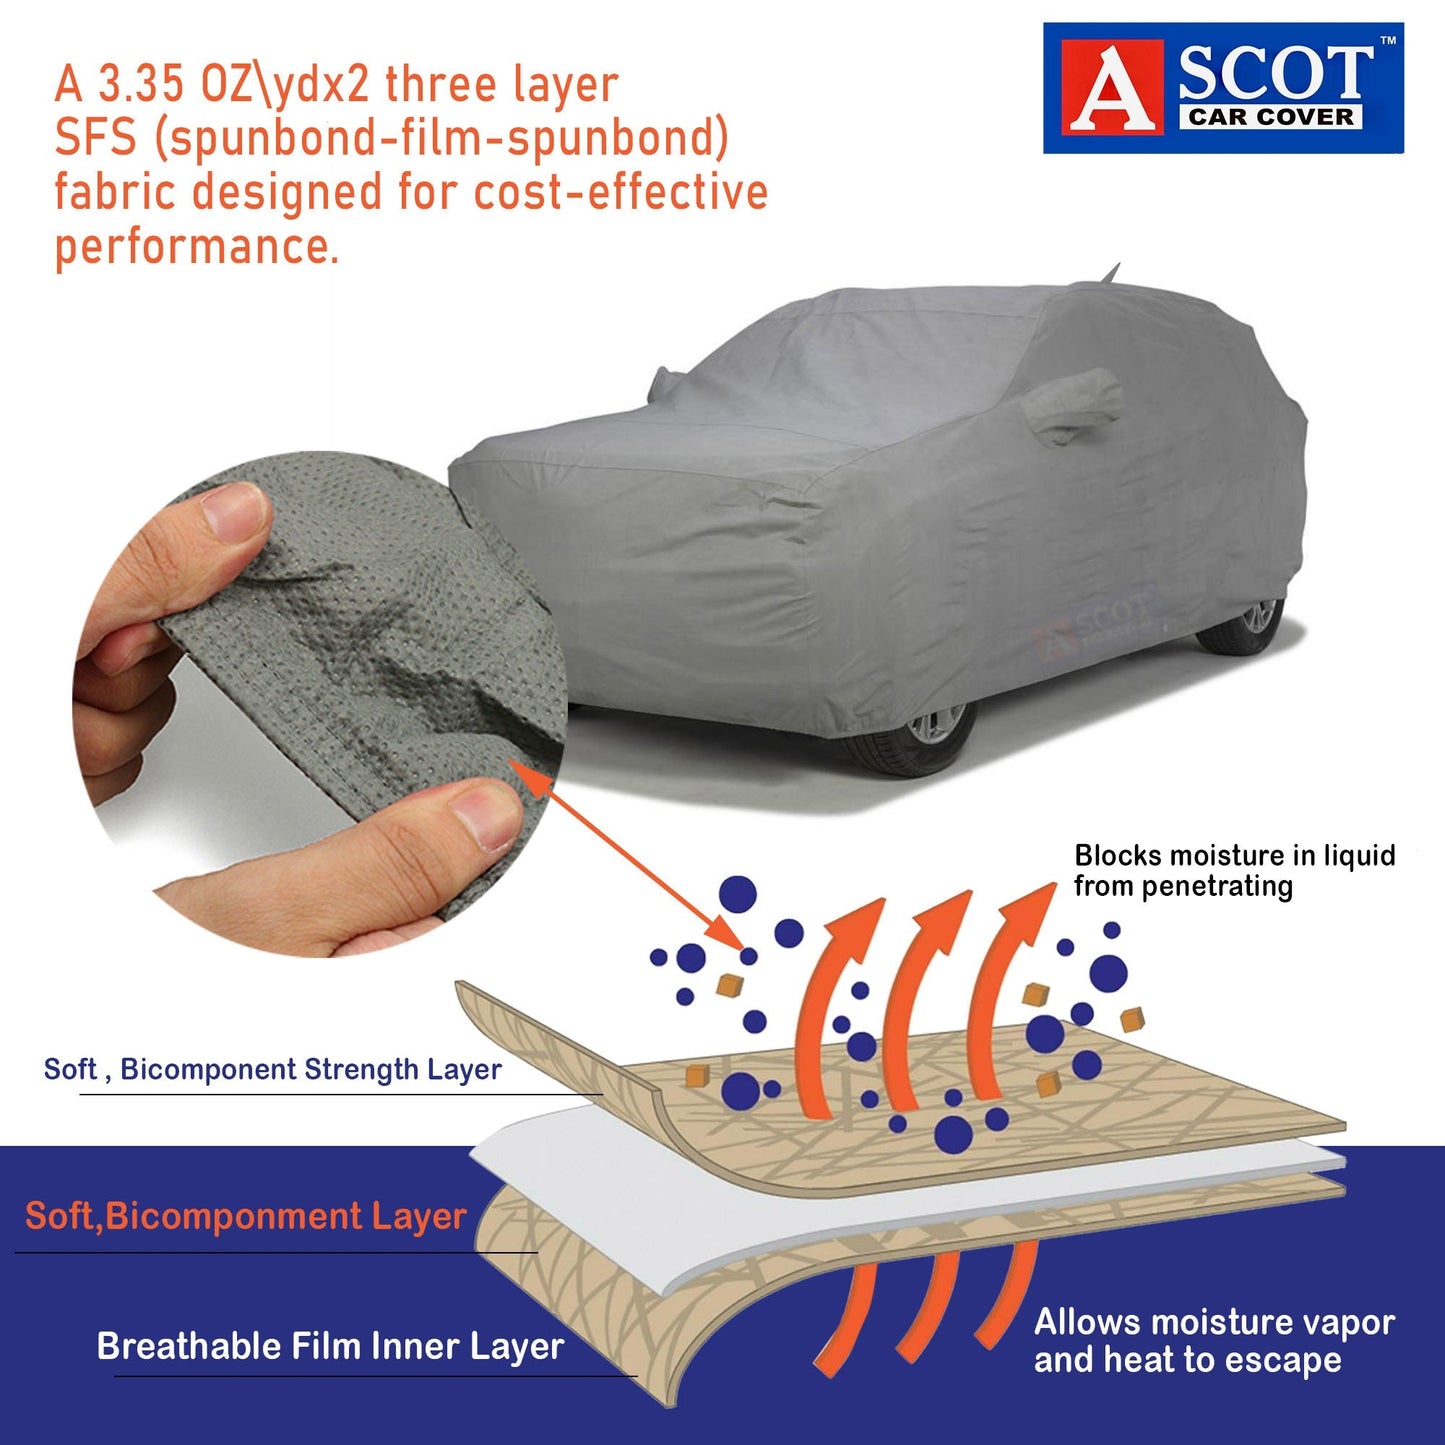 Ascot Waterproof car cover features heavy buckle, mirror & antenna pockets, tripple stitching & Soft cotton linning